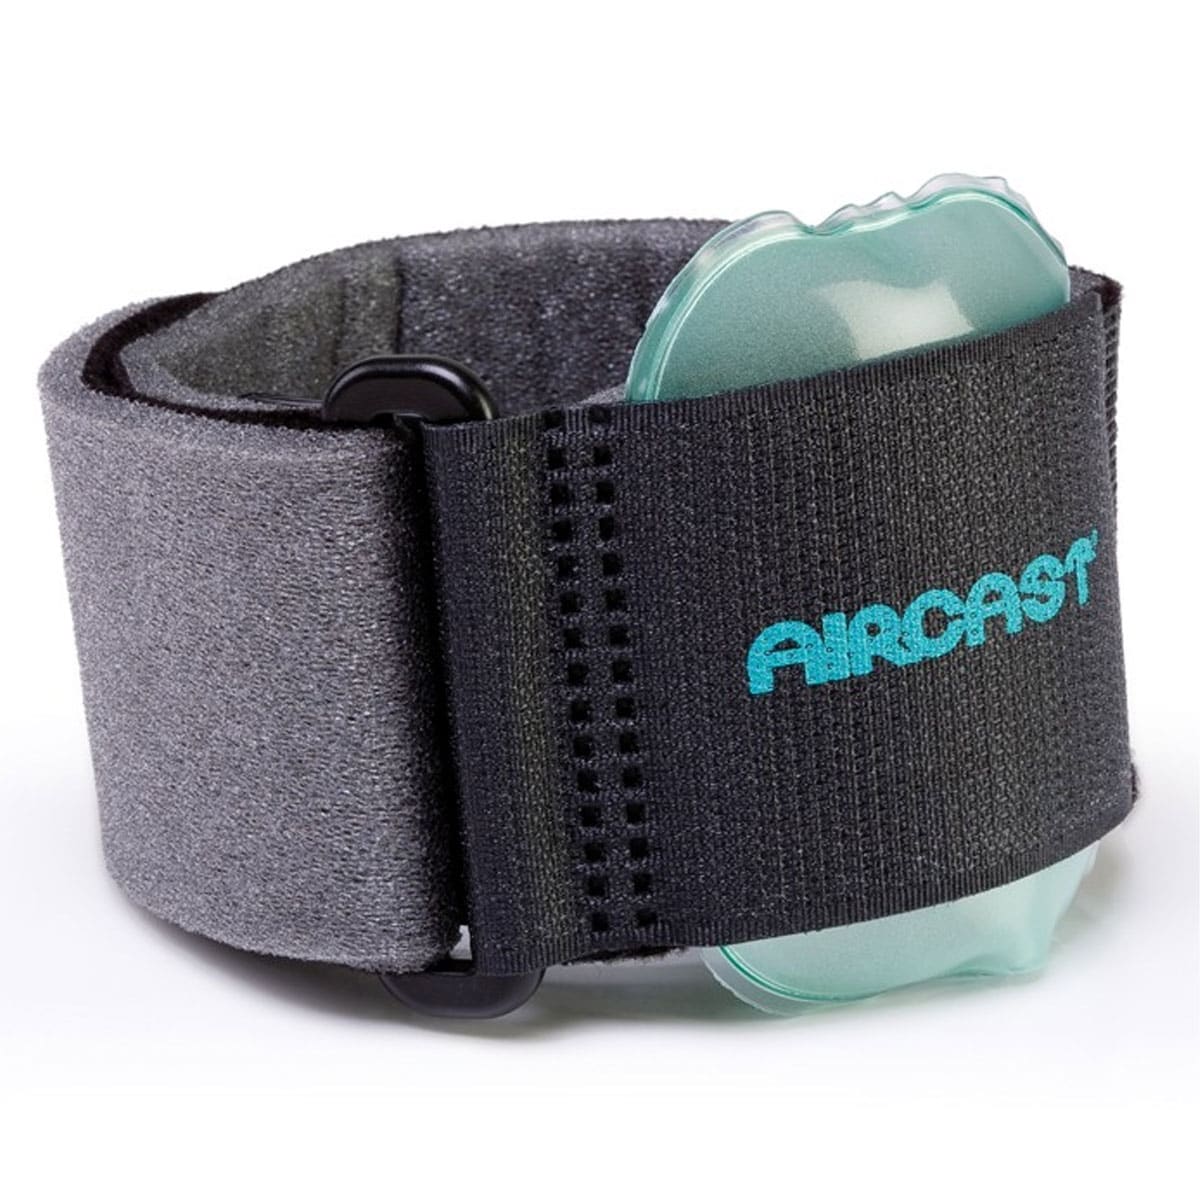 Aircast Pneumatic Armband for Tennis Elbow